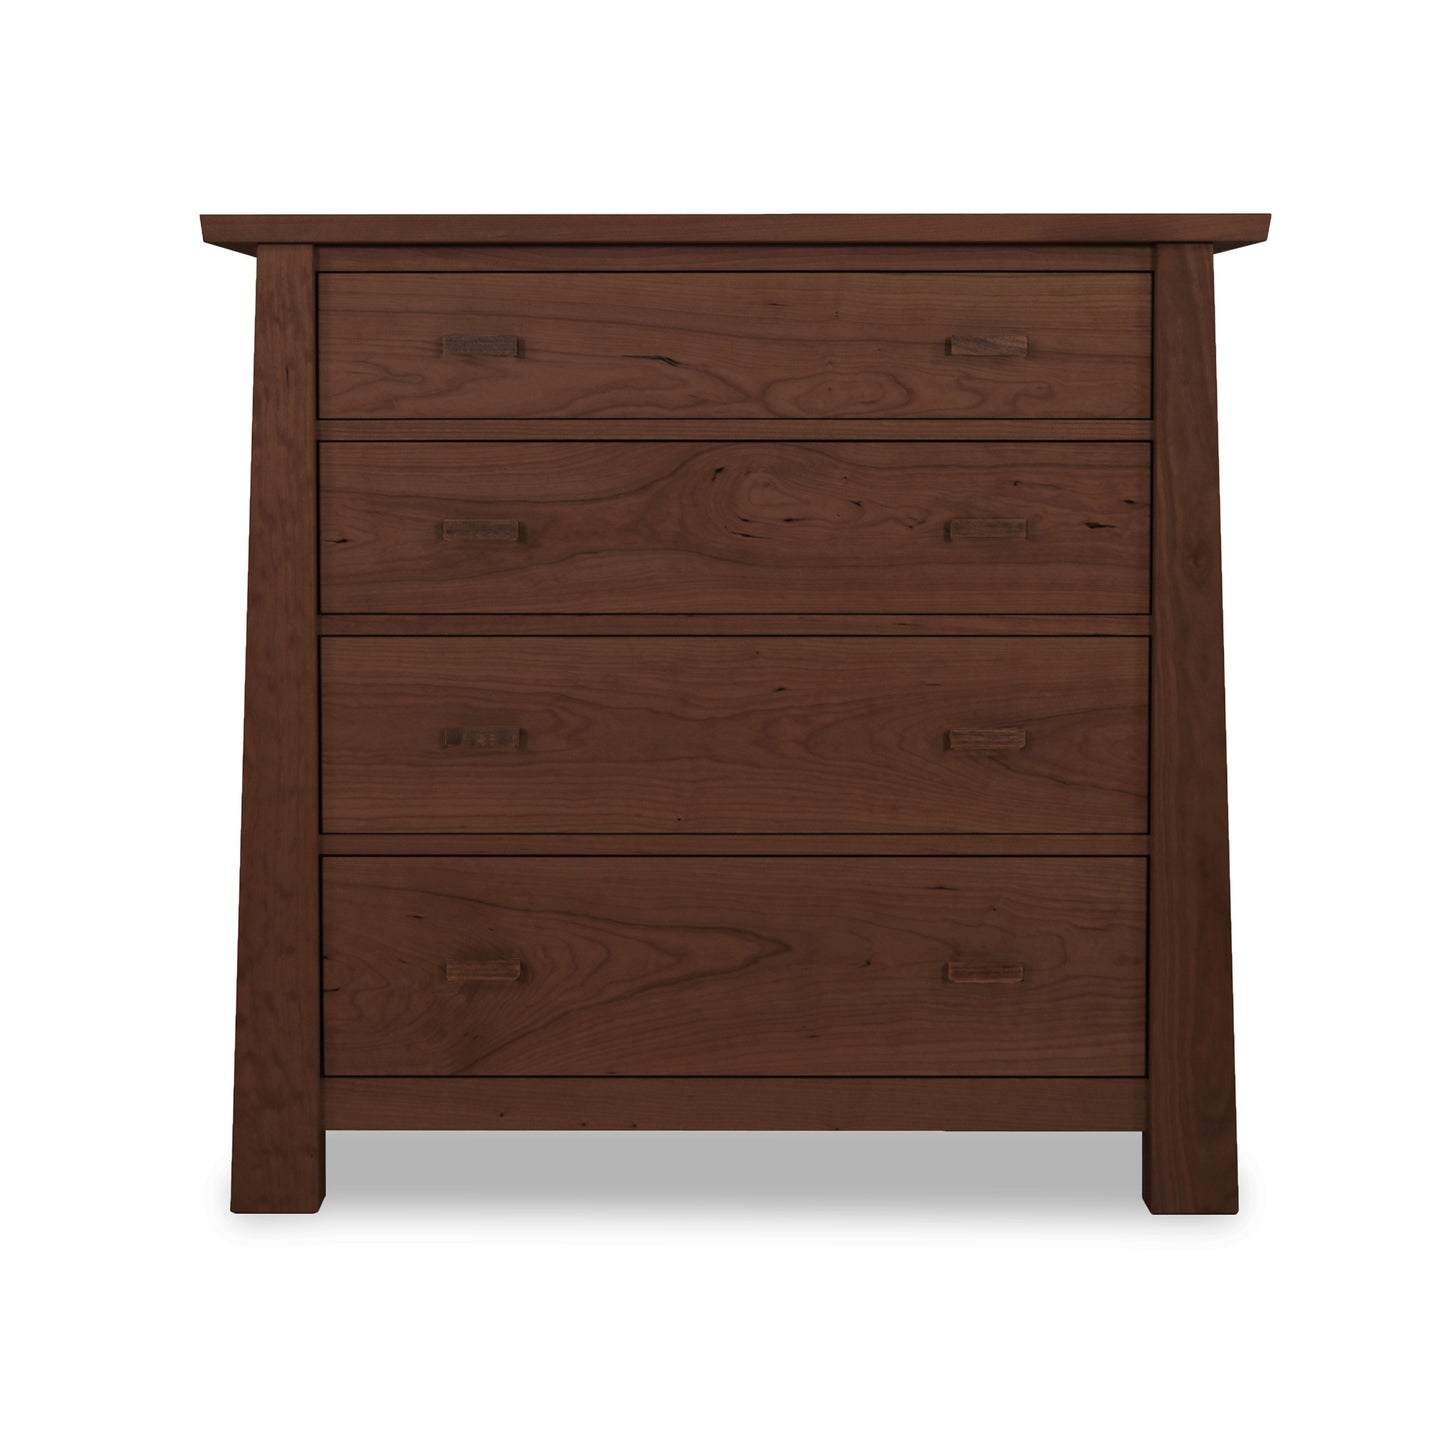 A Gamble 4-Drawer Chest by Maple Corner Woodworks in a dark brown color.